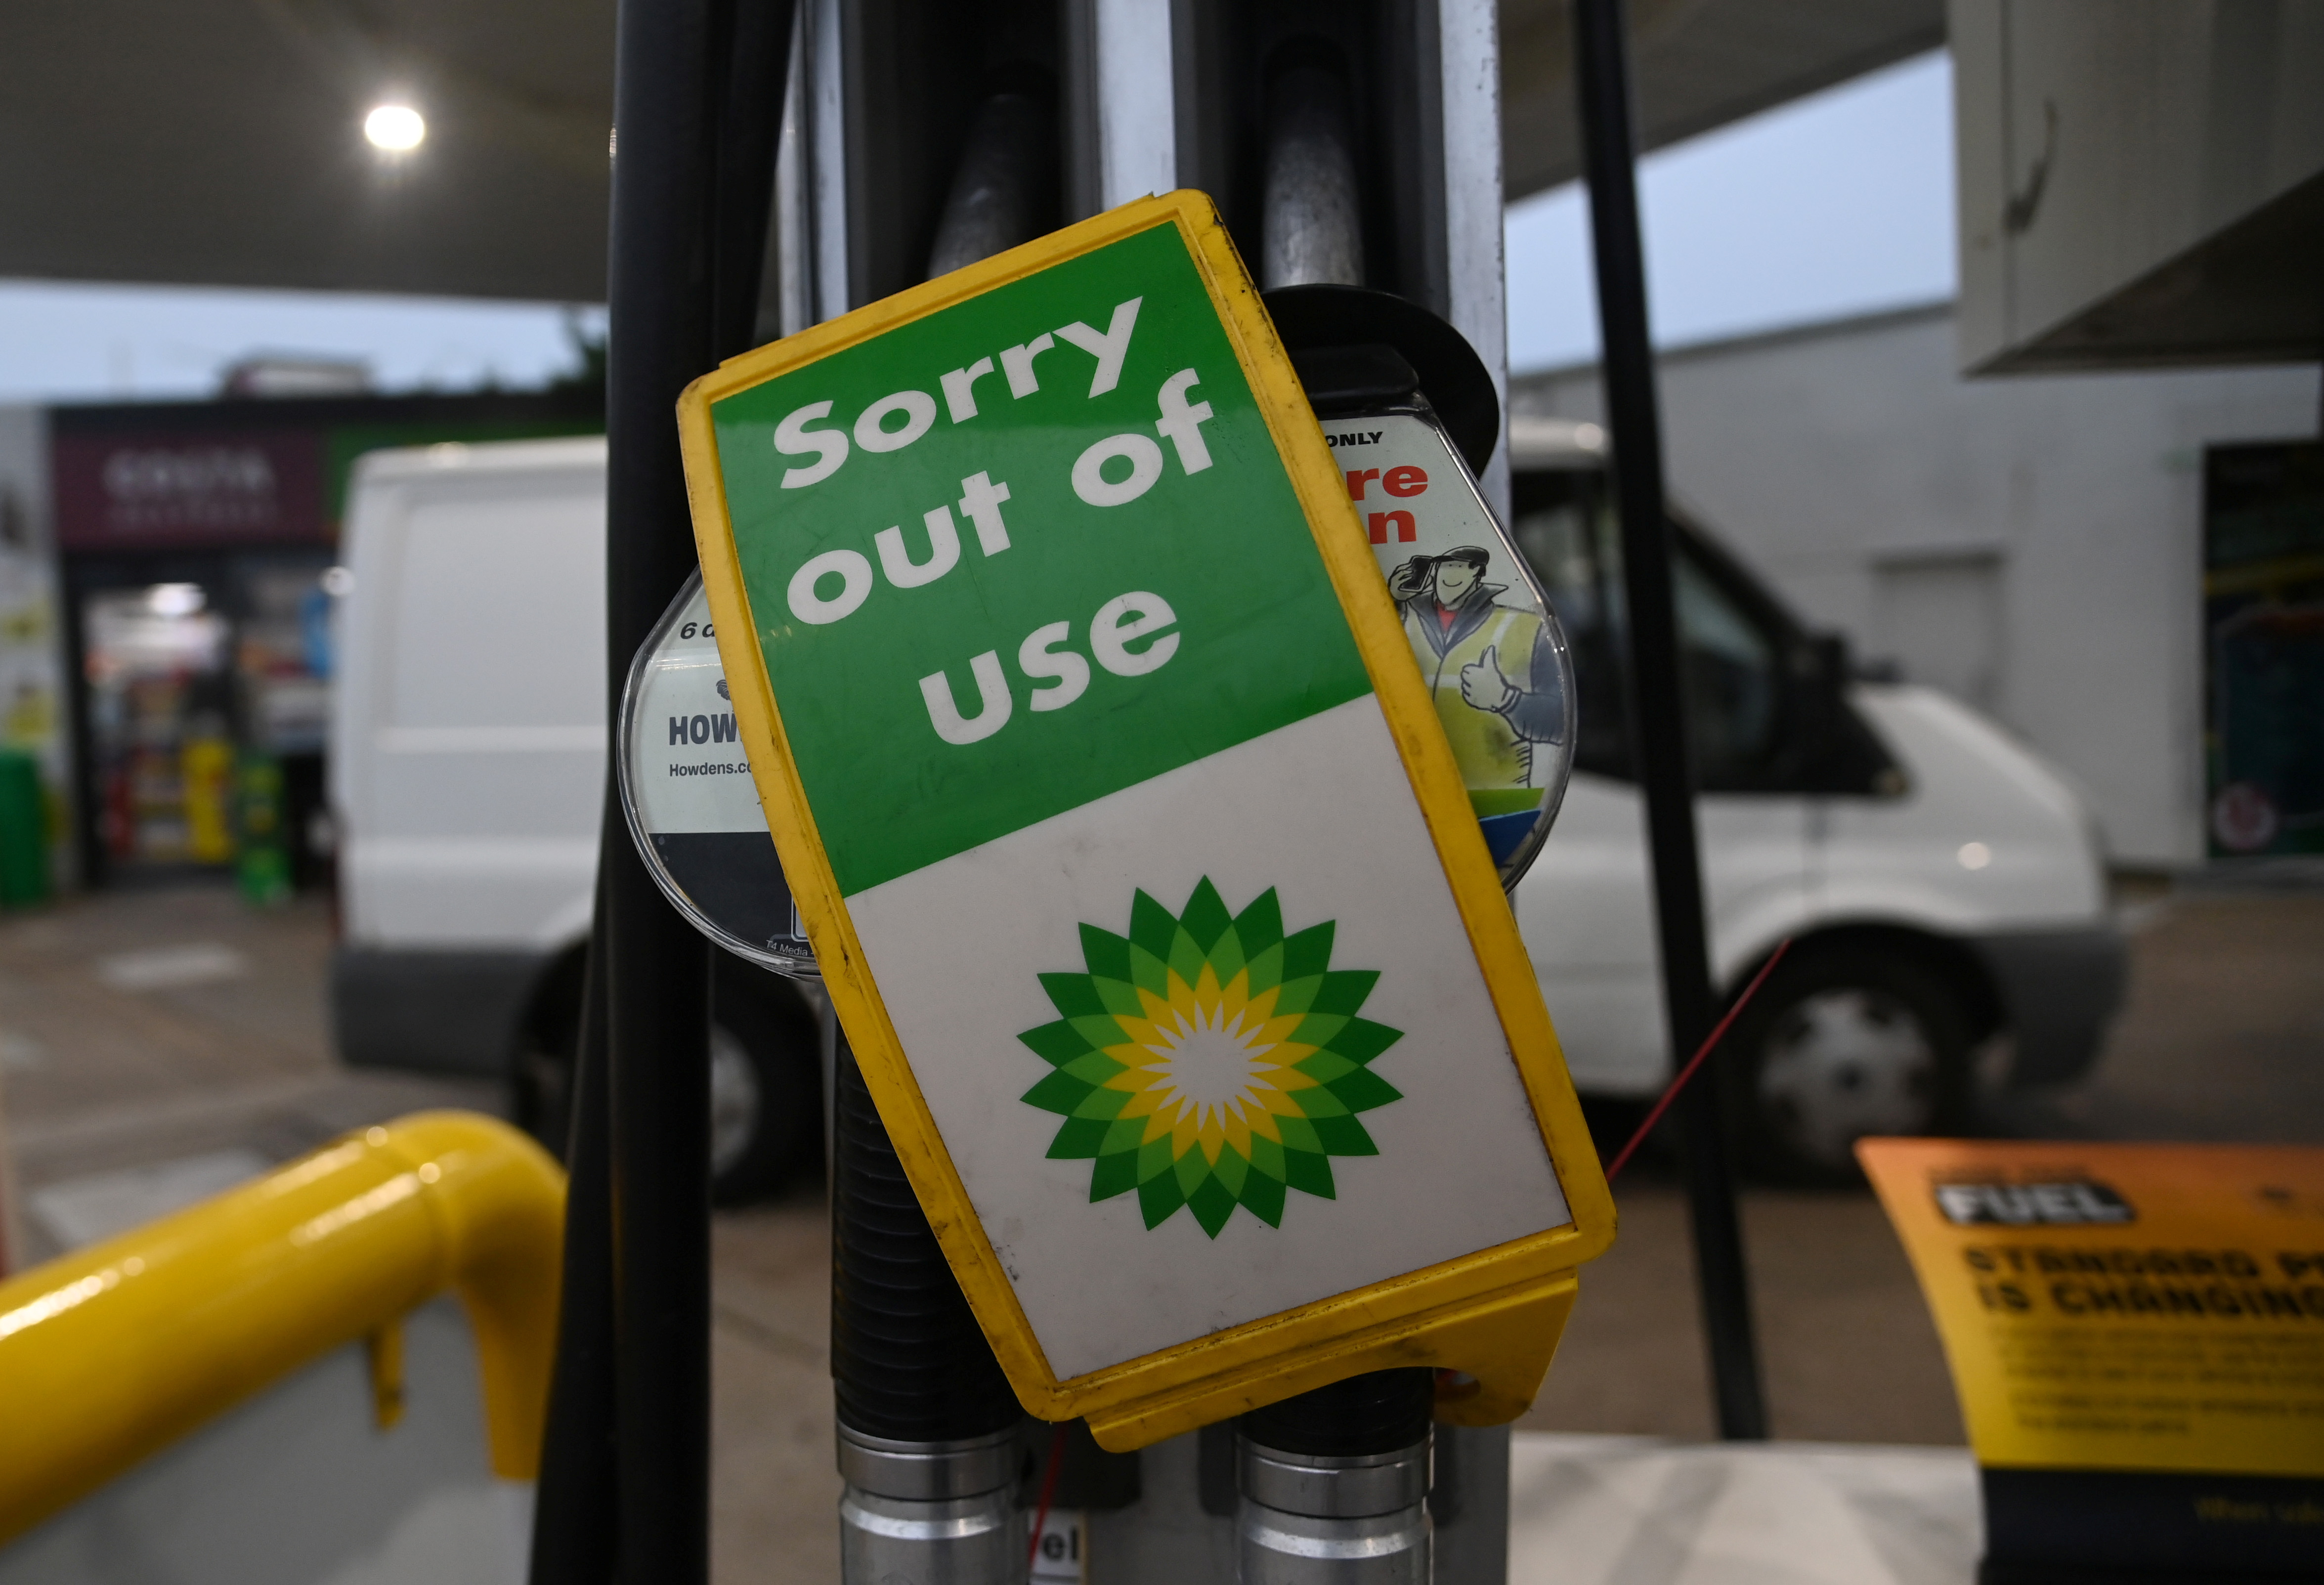 “Out of use” signs are placed over pumps at a petrol station in London, Britain, September 24, 2021. REUTERS/Toby Melville